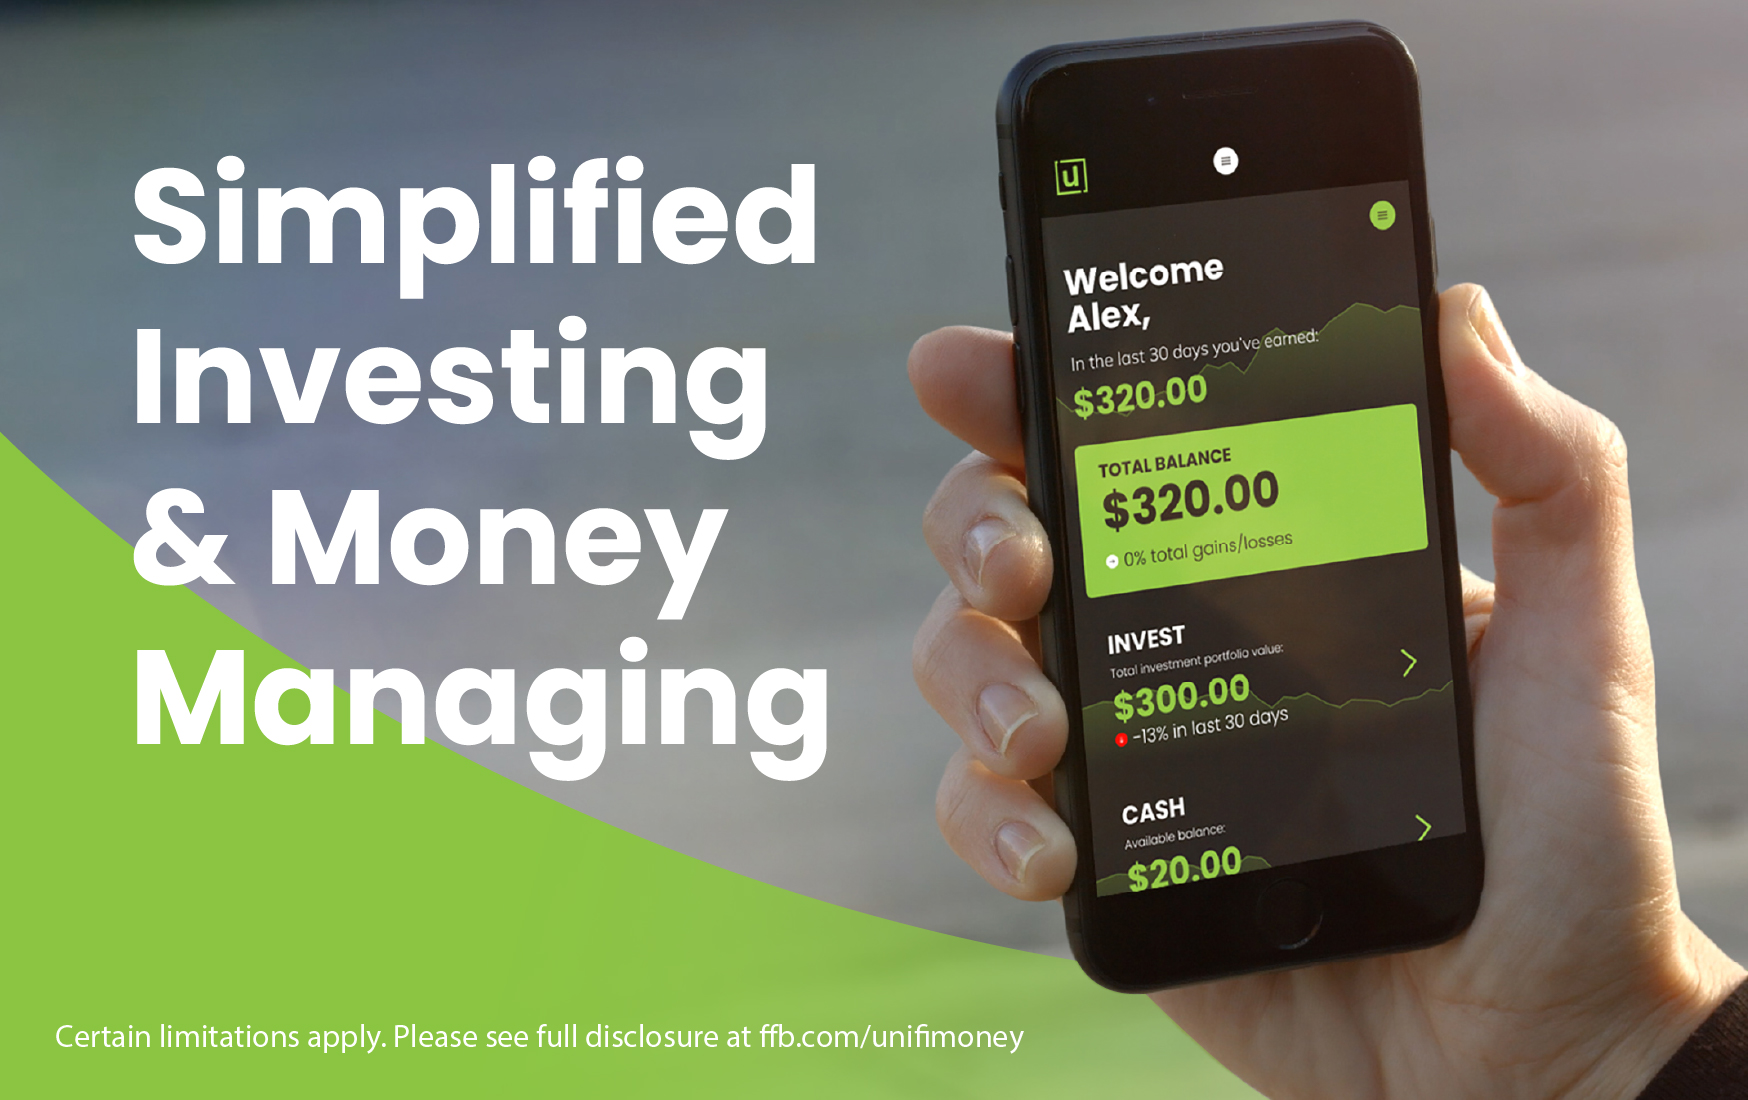 Simplified investing and Money Managing with Unifimoney